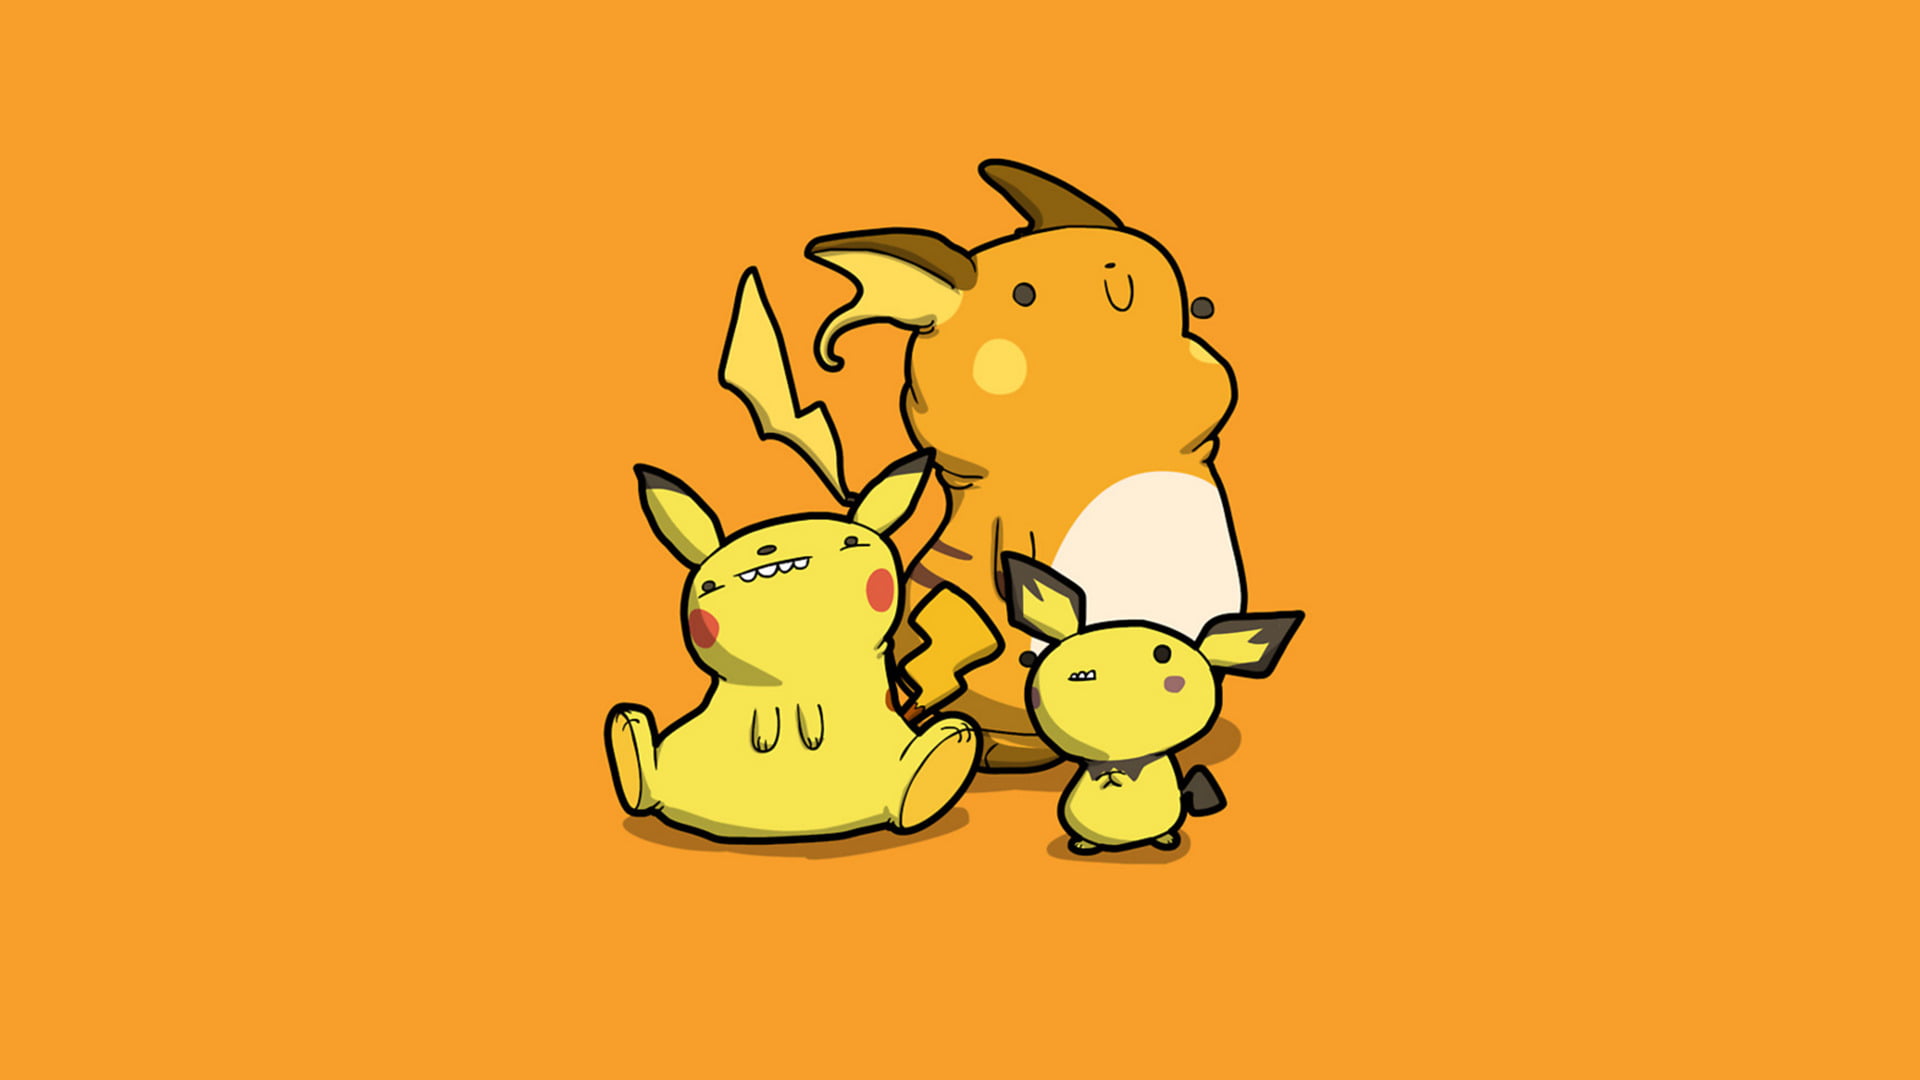 Pokémon, Pichu (Pokémon), Pikachu, Raichu (Pokémon), colored background